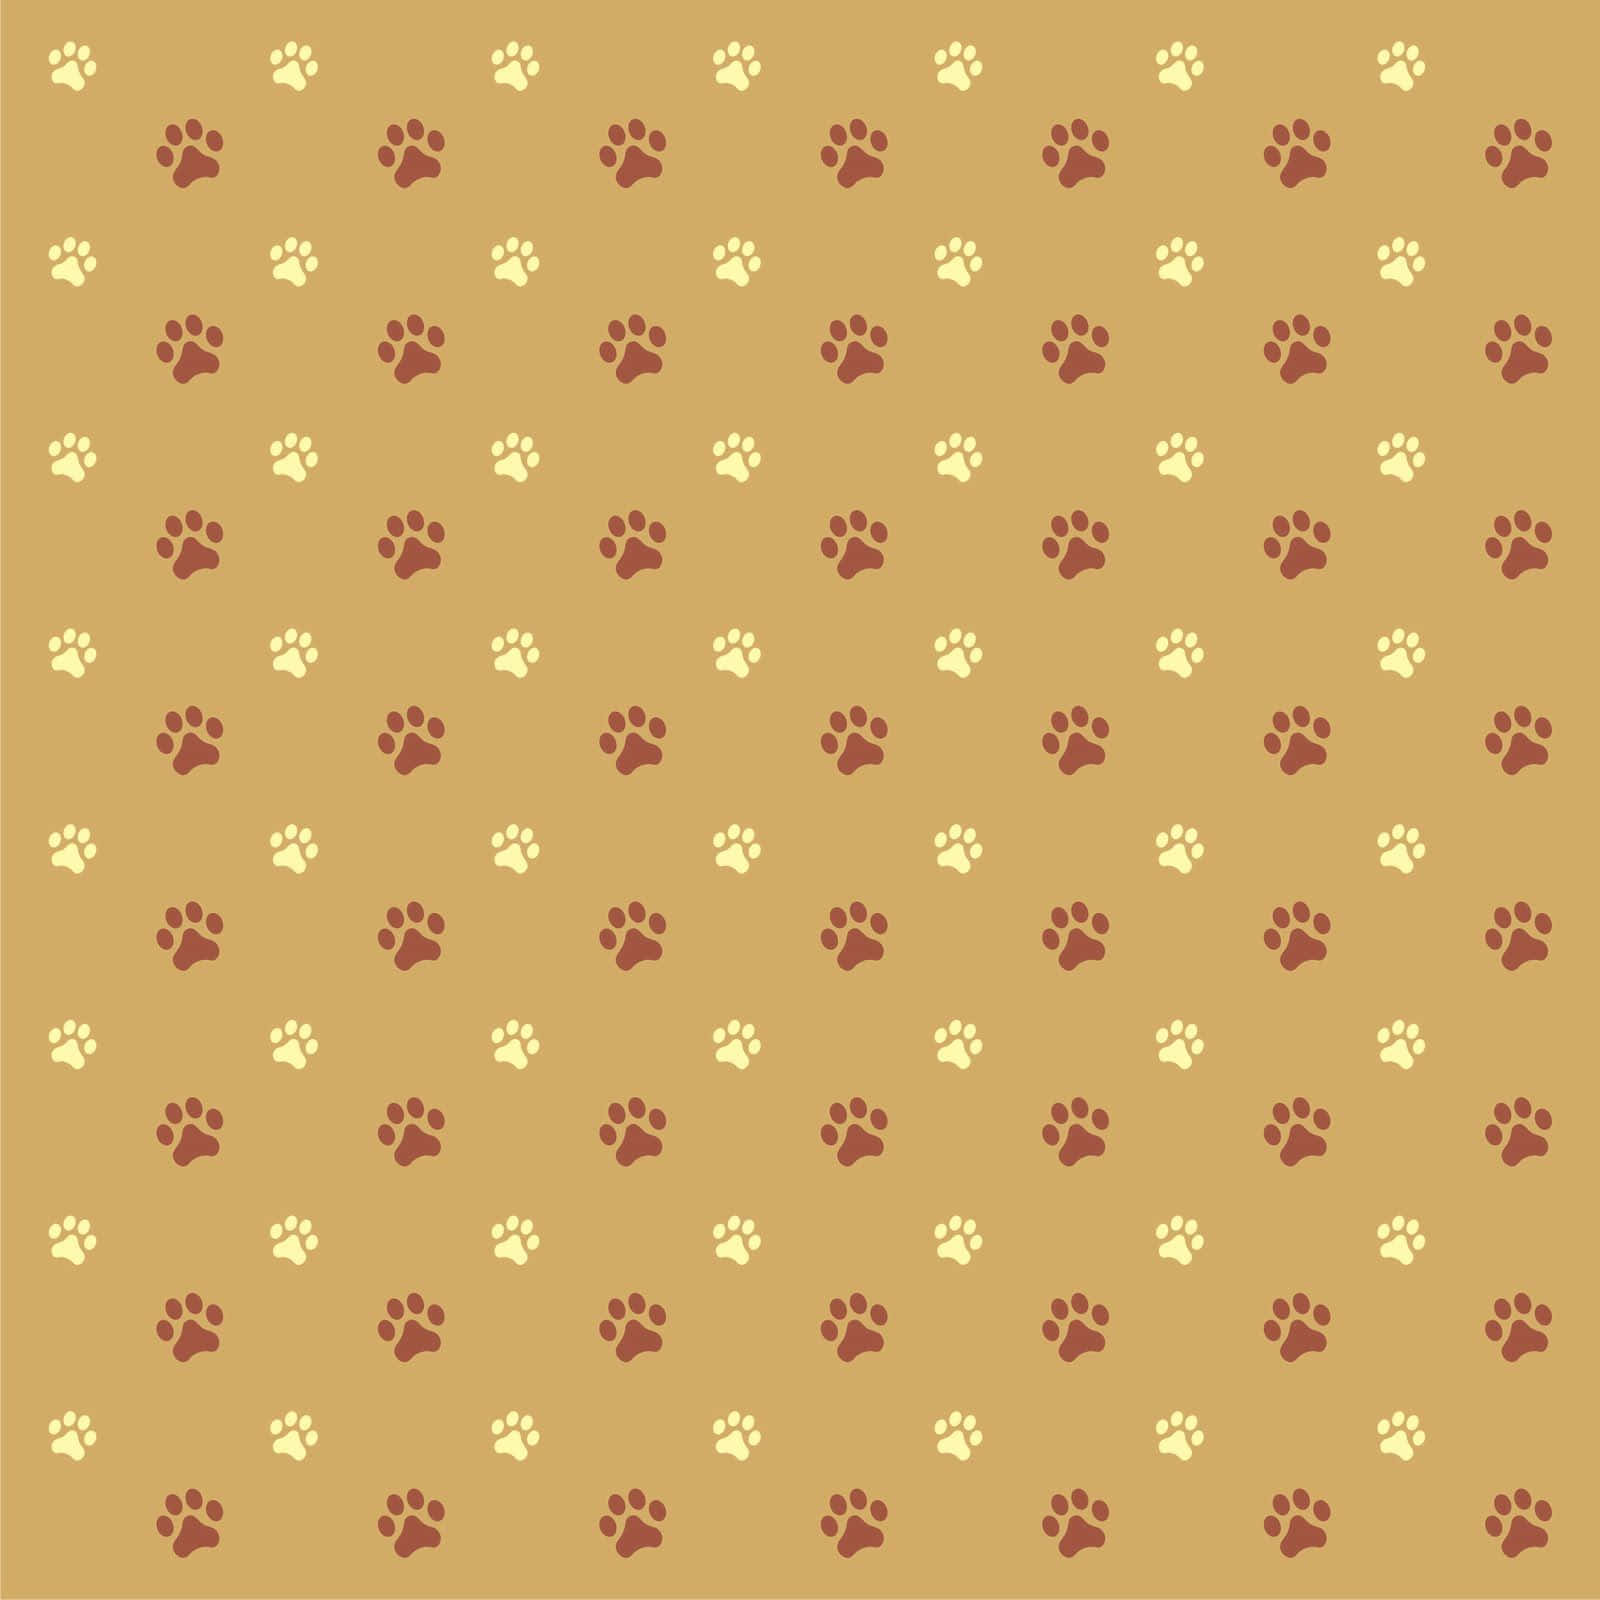 A Yellow Background With Paw Prints